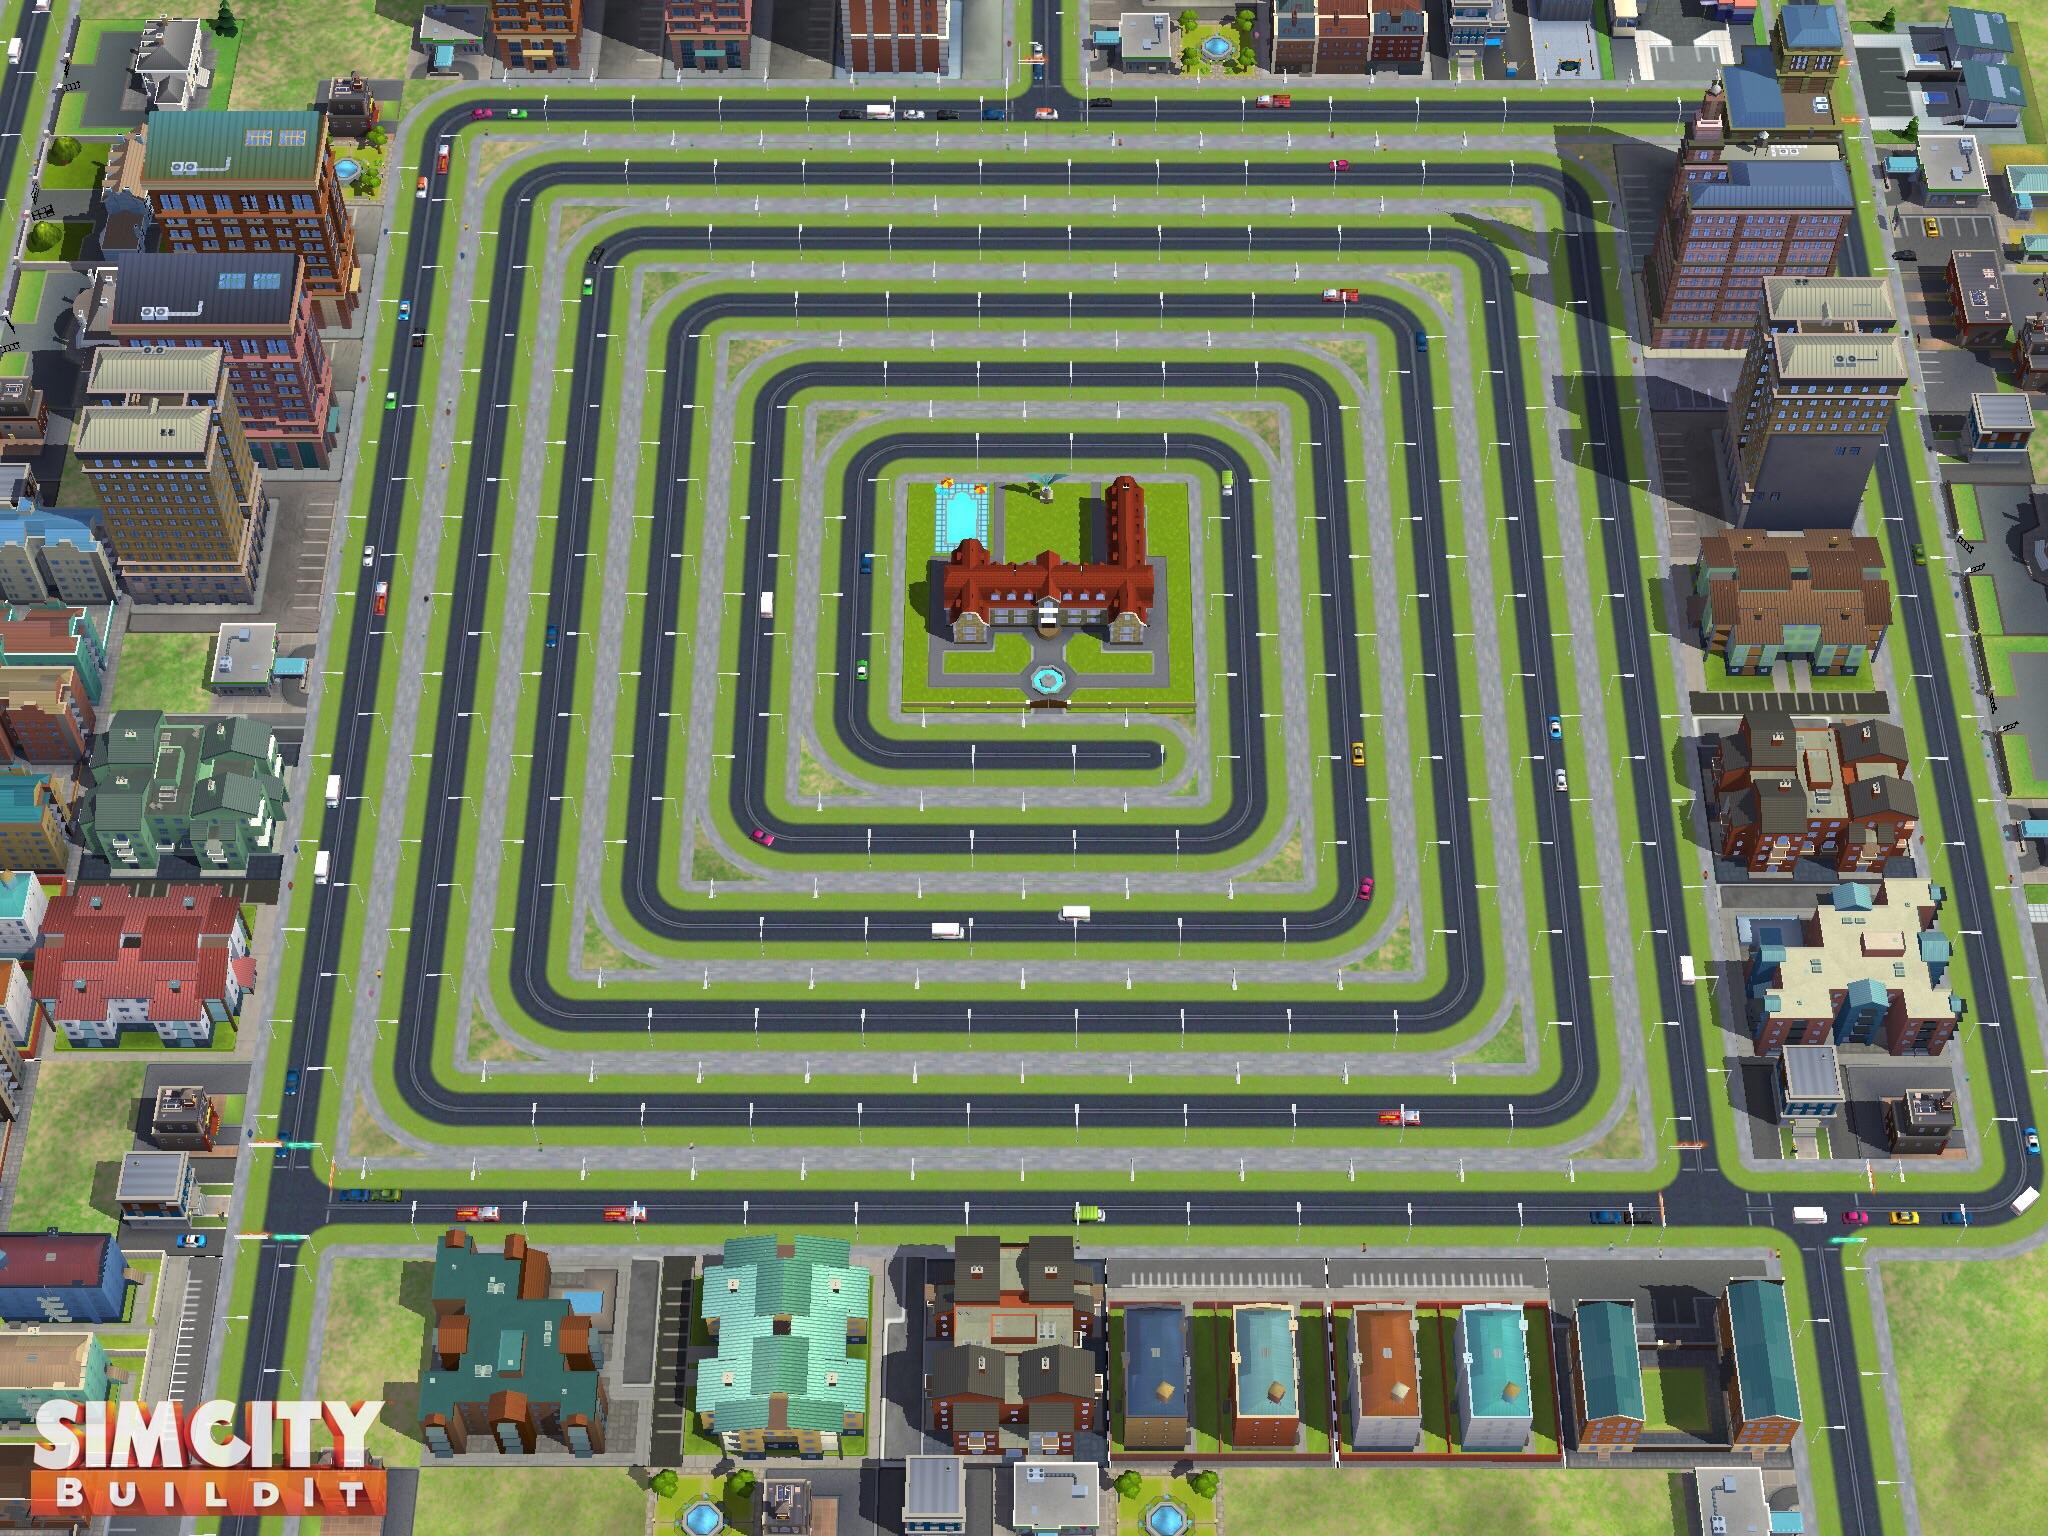 Simcity Buildit A Twitter When You Want To Give Your Road Layout A Unique Flair Simcitybuildit